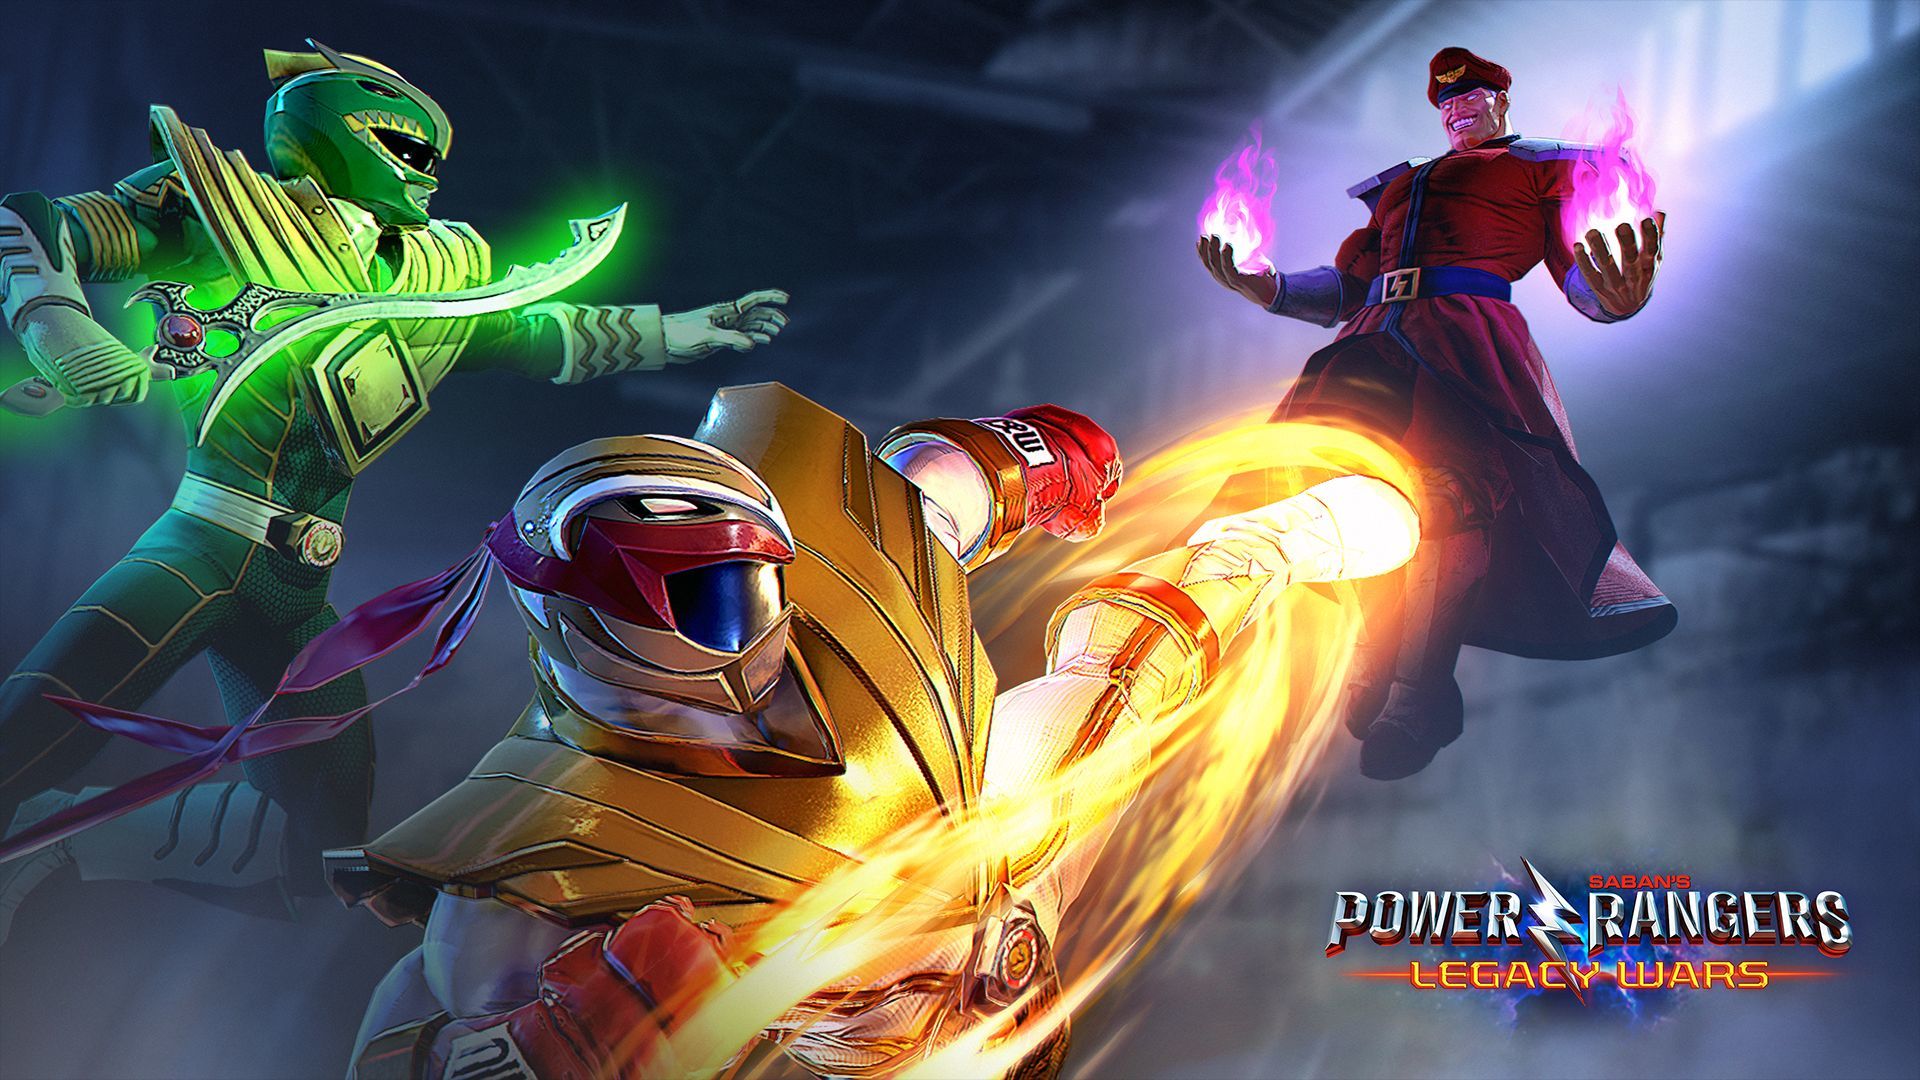 Power Rangers: Legacy Wars Introduces the Ryu Ranger to the Game